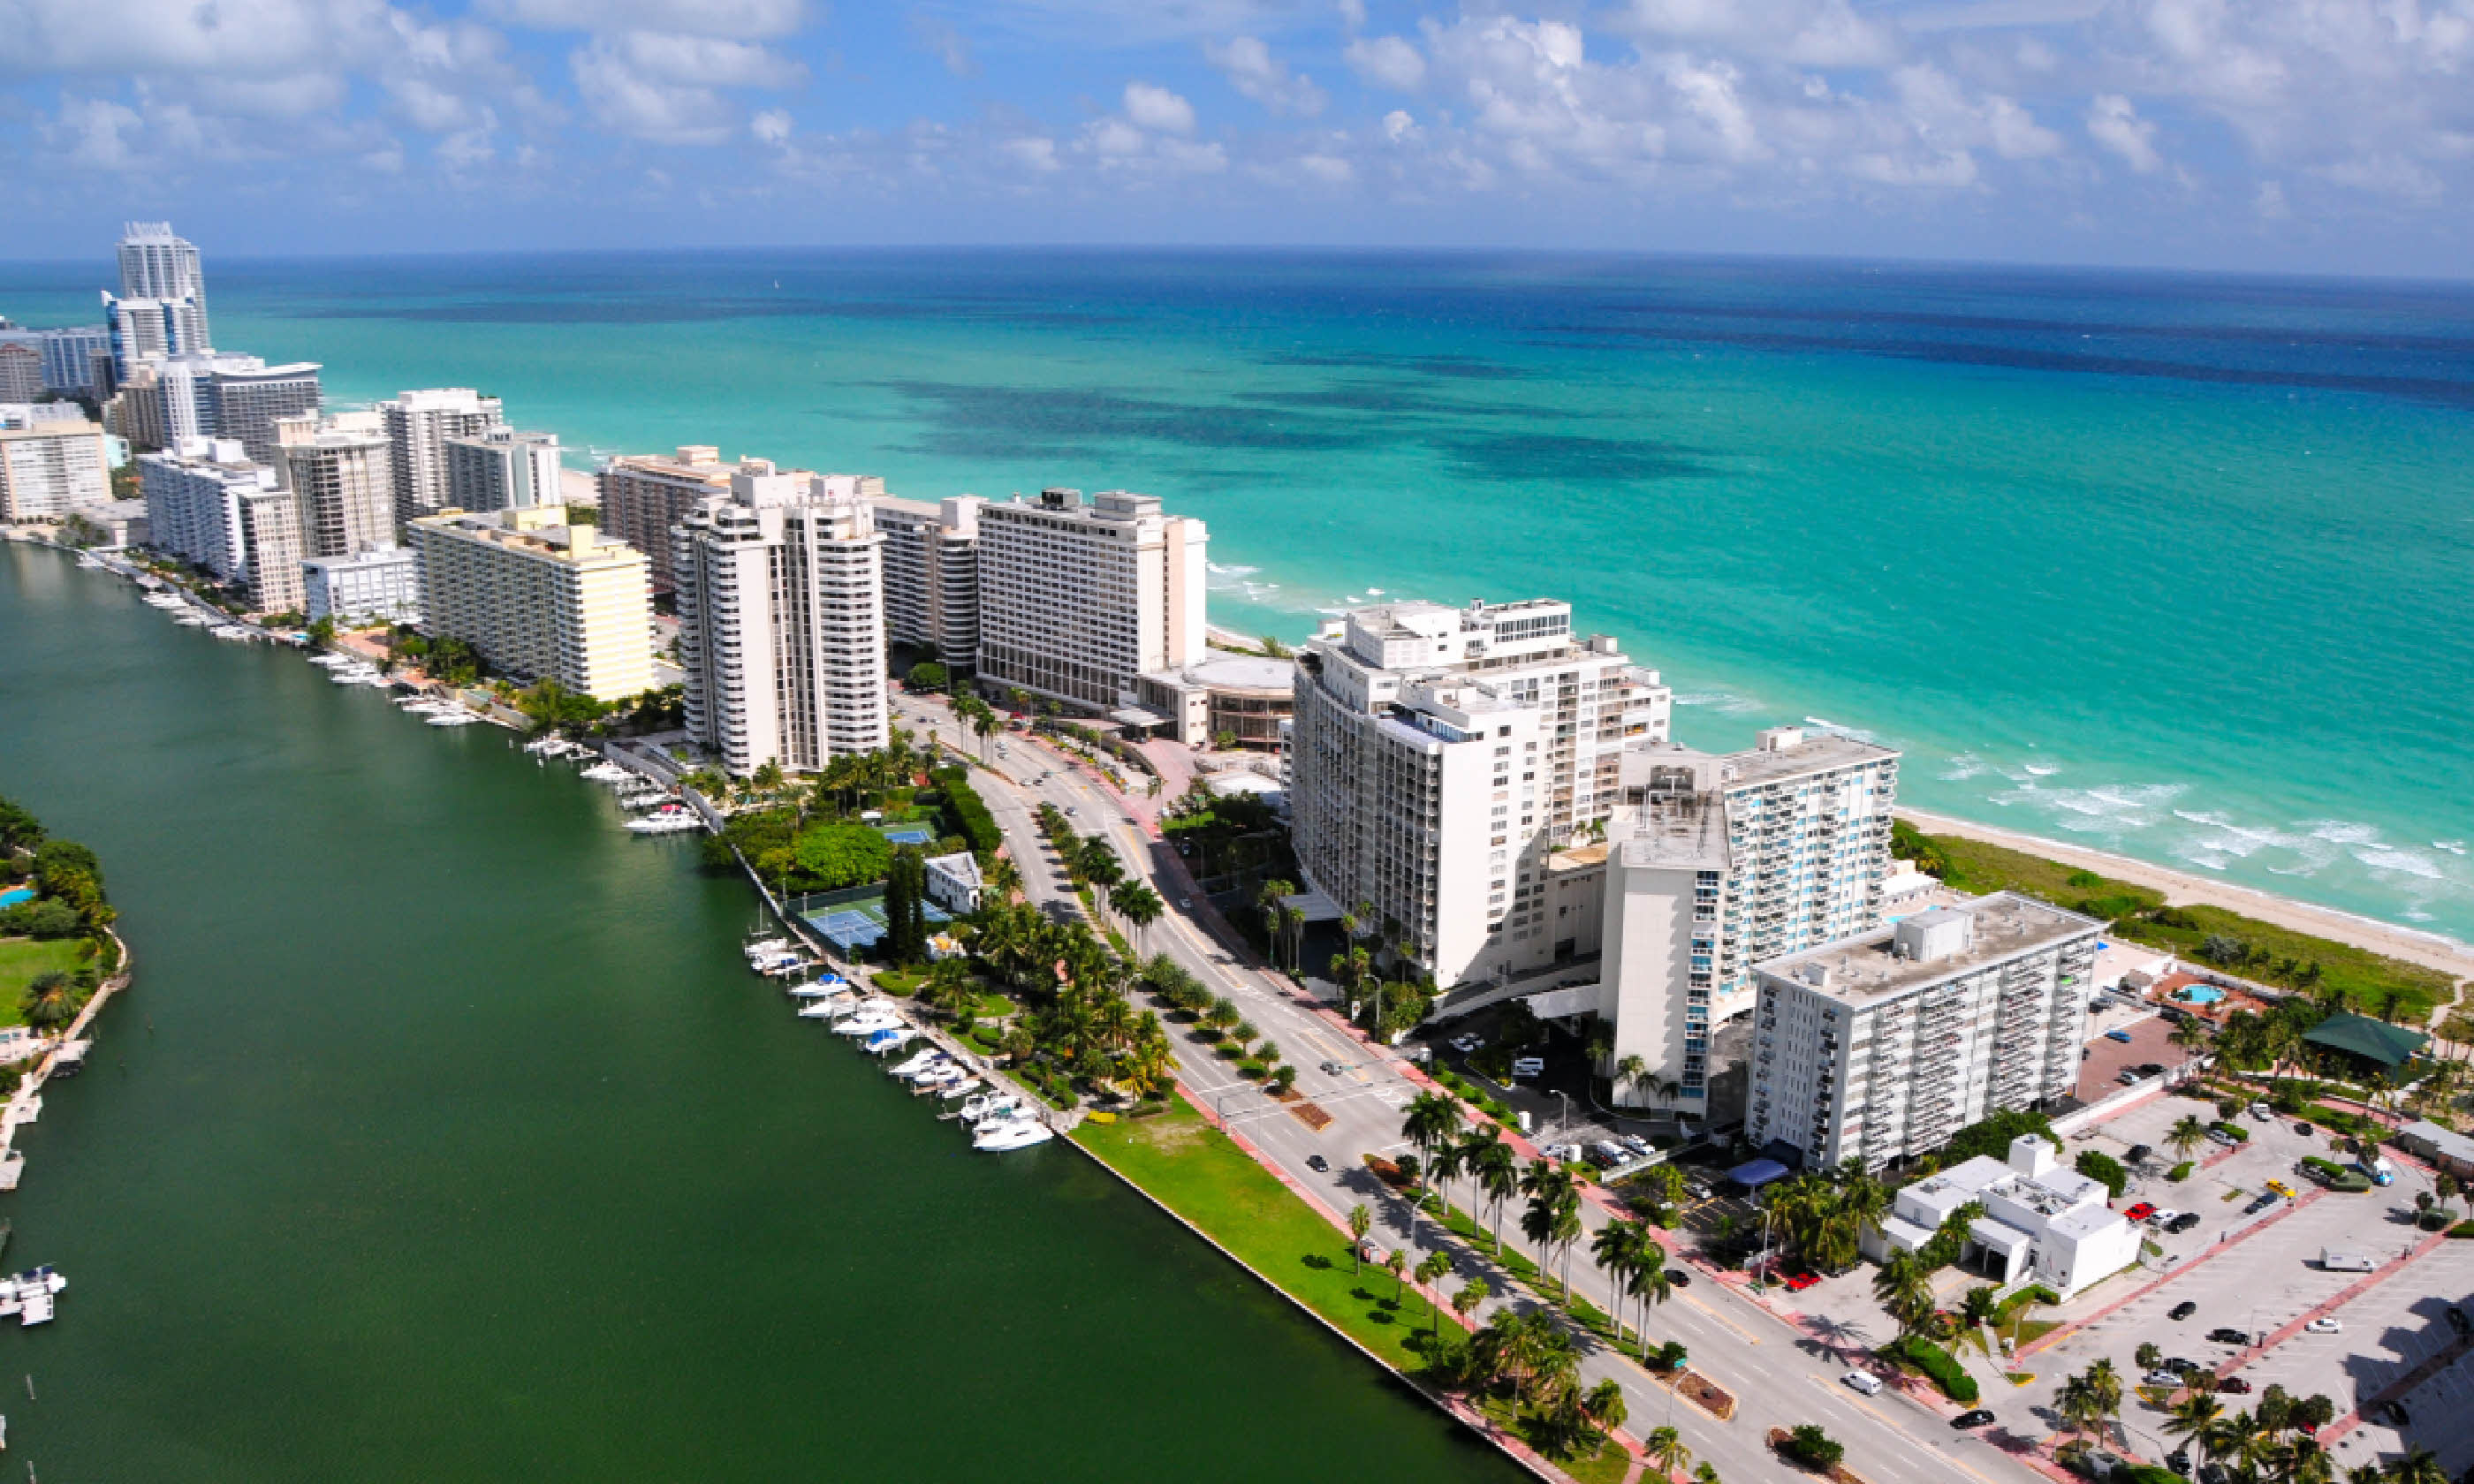 Aerial view of Miami South Beach, Florida (Shutterstock)